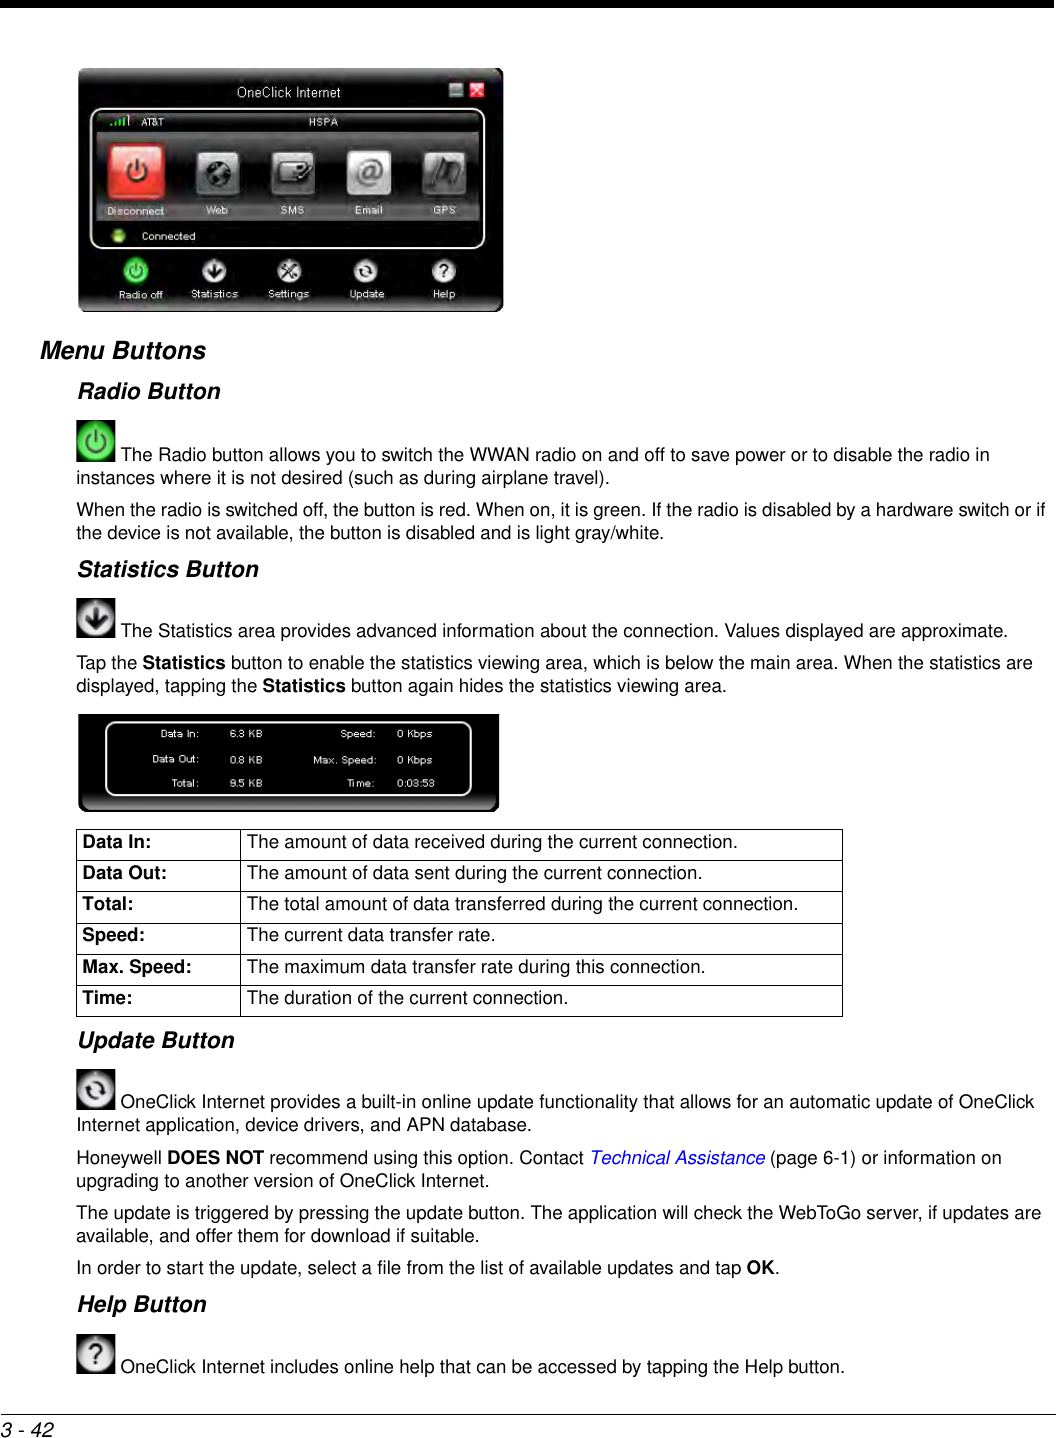 3 - 42Menu ButtonsRadio Button The Radio button allows you to switch the WWAN radio on and off to save power or to disable the radio in instances where it is not desired (such as during airplane travel).When the radio is switched off, the button is red. When on, it is green. If the radio is disabled by a hardware switch or if the device is not available, the button is disabled and is light gray/white.Statistics Button The Statistics area provides advanced information about the connection. Values displayed are approximate.Tap the Statistics button to enable the statistics viewing area, which is below the main area. When the statistics are displayed, tapping the Statistics button again hides the statistics viewing area.Update Button OneClick Internet provides a built-in online update functionality that allows for an automatic update of OneClick Internet application, device drivers, and APN database.Honeywell DOES NOT recommend using this option. Contact Technical Assistance (page 6-1) or information on upgrading to another version of OneClick Internet.The update is triggered by pressing the update button. The application will check the WebToGo server, if updates are available, and offer them for download if suitable.In order to start the update, select a file from the list of available updates and tap OK.Help Button OneClick Internet includes online help that can be accessed by tapping the Help button.Data In: The amount of data received during the current connection.Data Out: The amount of data sent during the current connection. Total: The total amount of data transferred during the current connection.Speed: The current data transfer rate.Max. Speed: The maximum data transfer rate during this connection.Time: The duration of the current connection.